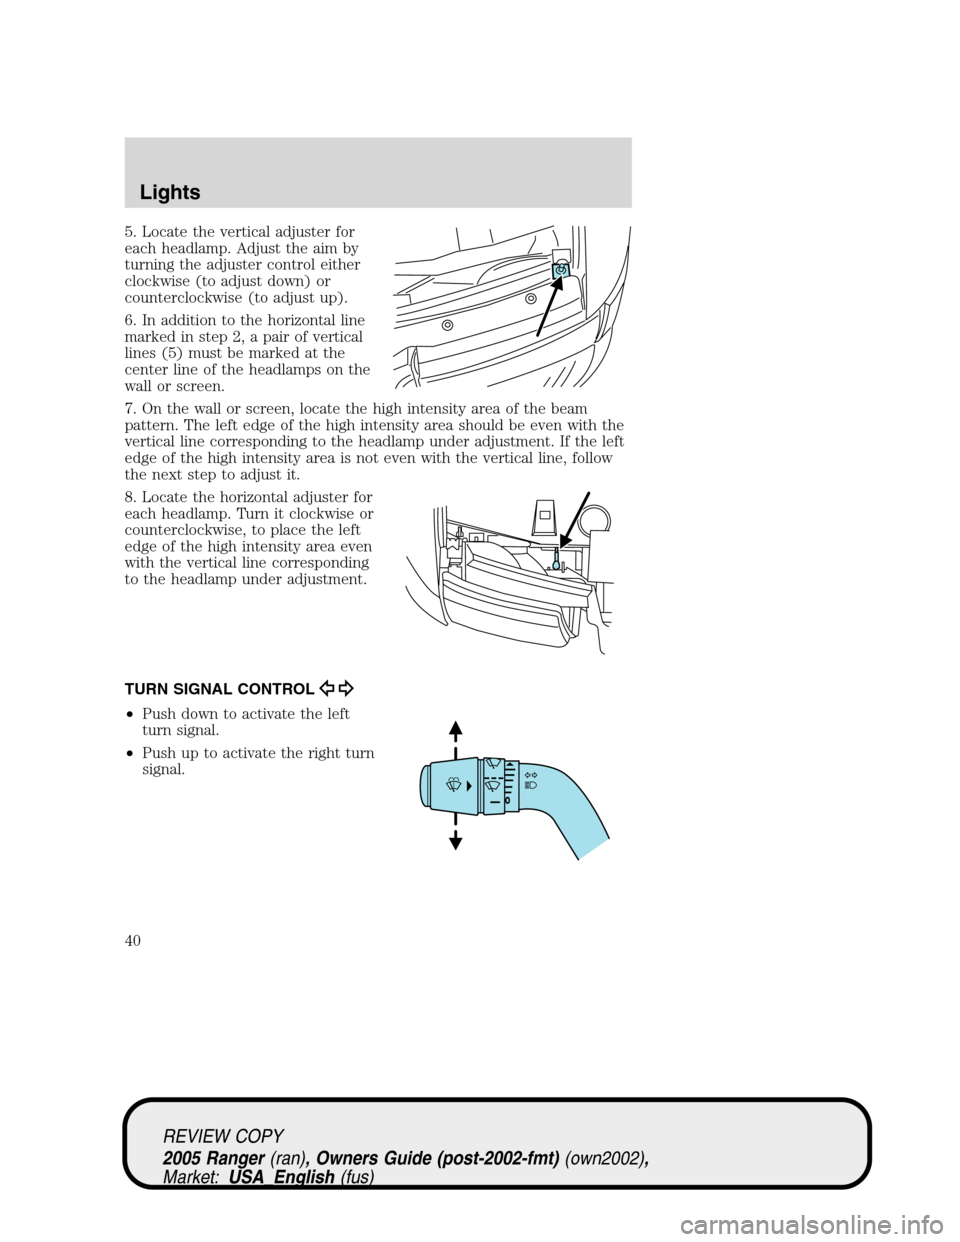 FORD RANGER 2005 2.G Owners Manual 5. Locate the vertical adjuster for
each headlamp. Adjust the aim by
turning the adjuster control either
clockwise (to adjust down) or
counterclockwise (to adjust up).
6. In addition to the horizontal